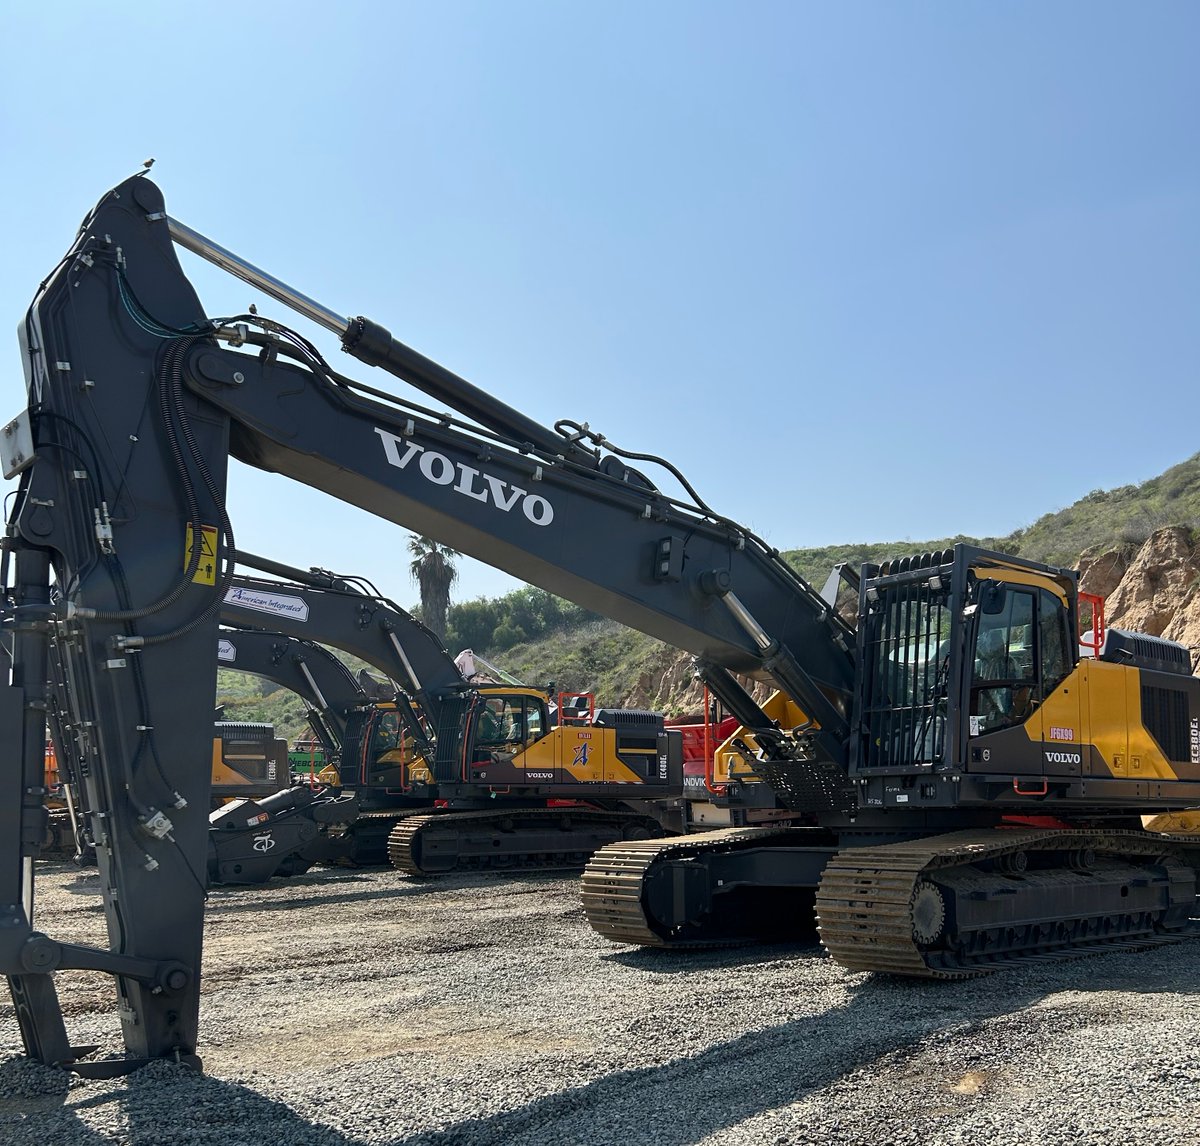 Which attachment would you put on our EC380 Excavator?

#volvoces #excavator #construction #constructionequipment #heavyequipment #explore #californiaconstruction